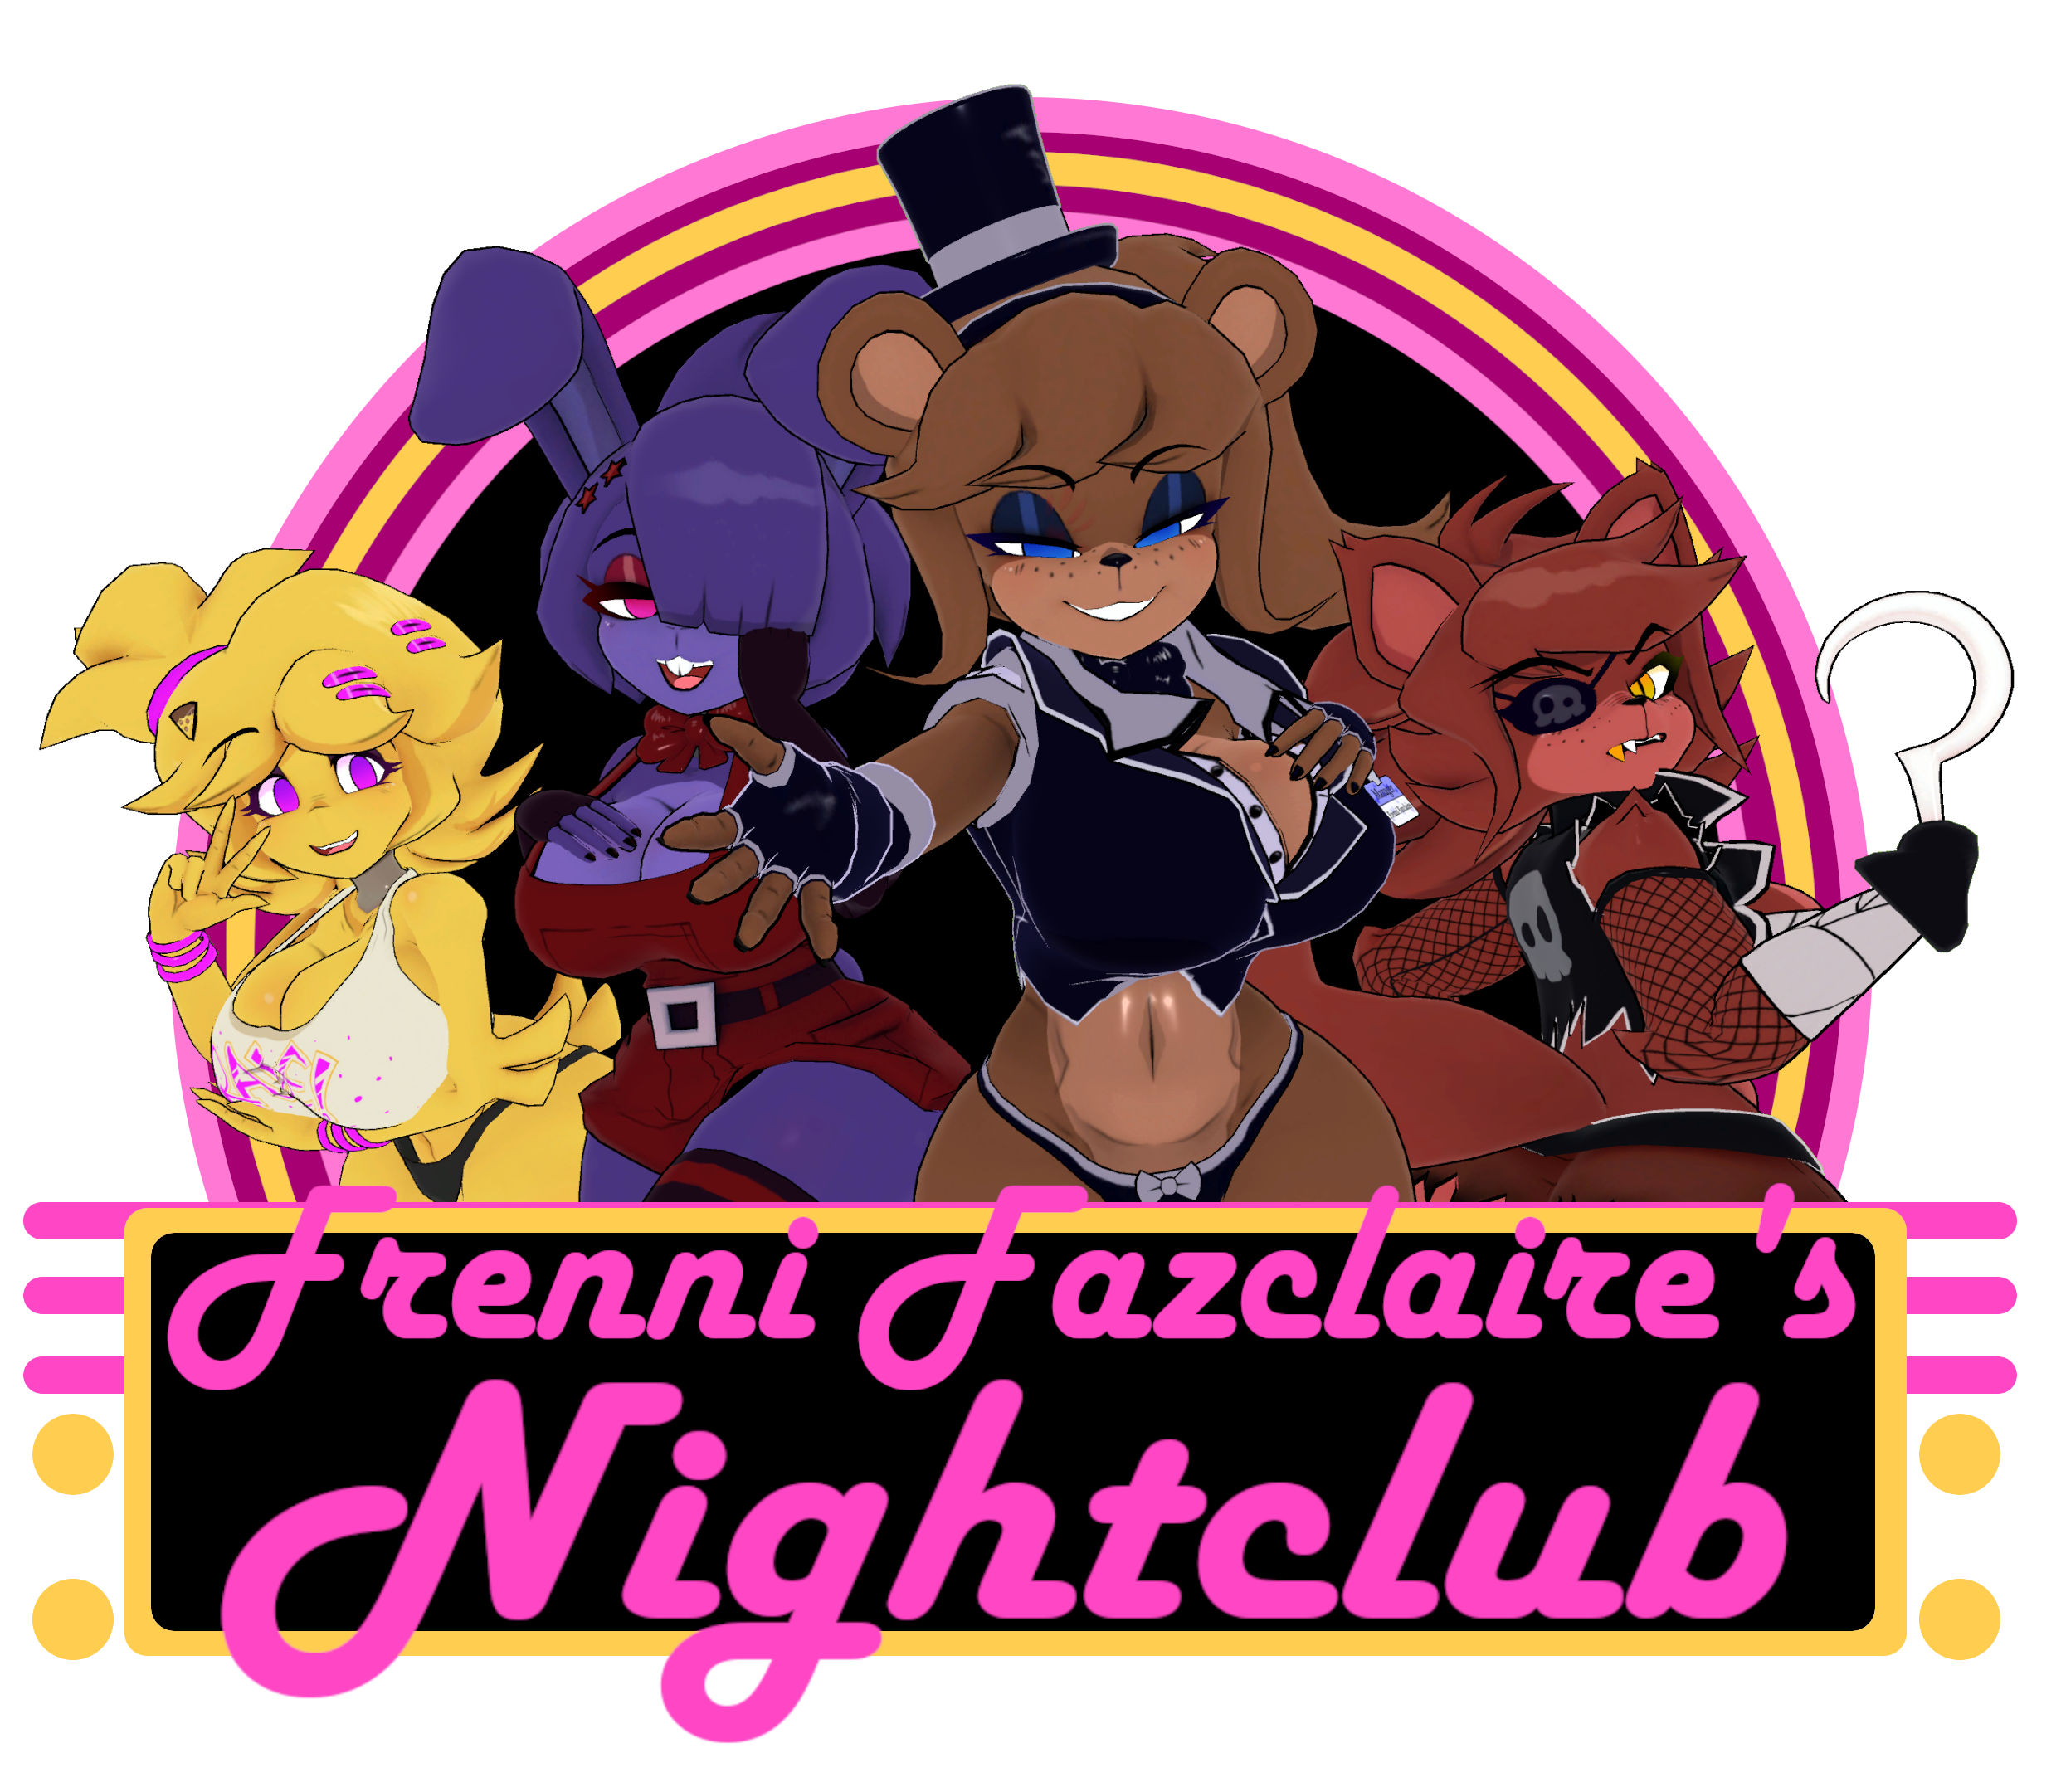 Nightshift at fazclaires